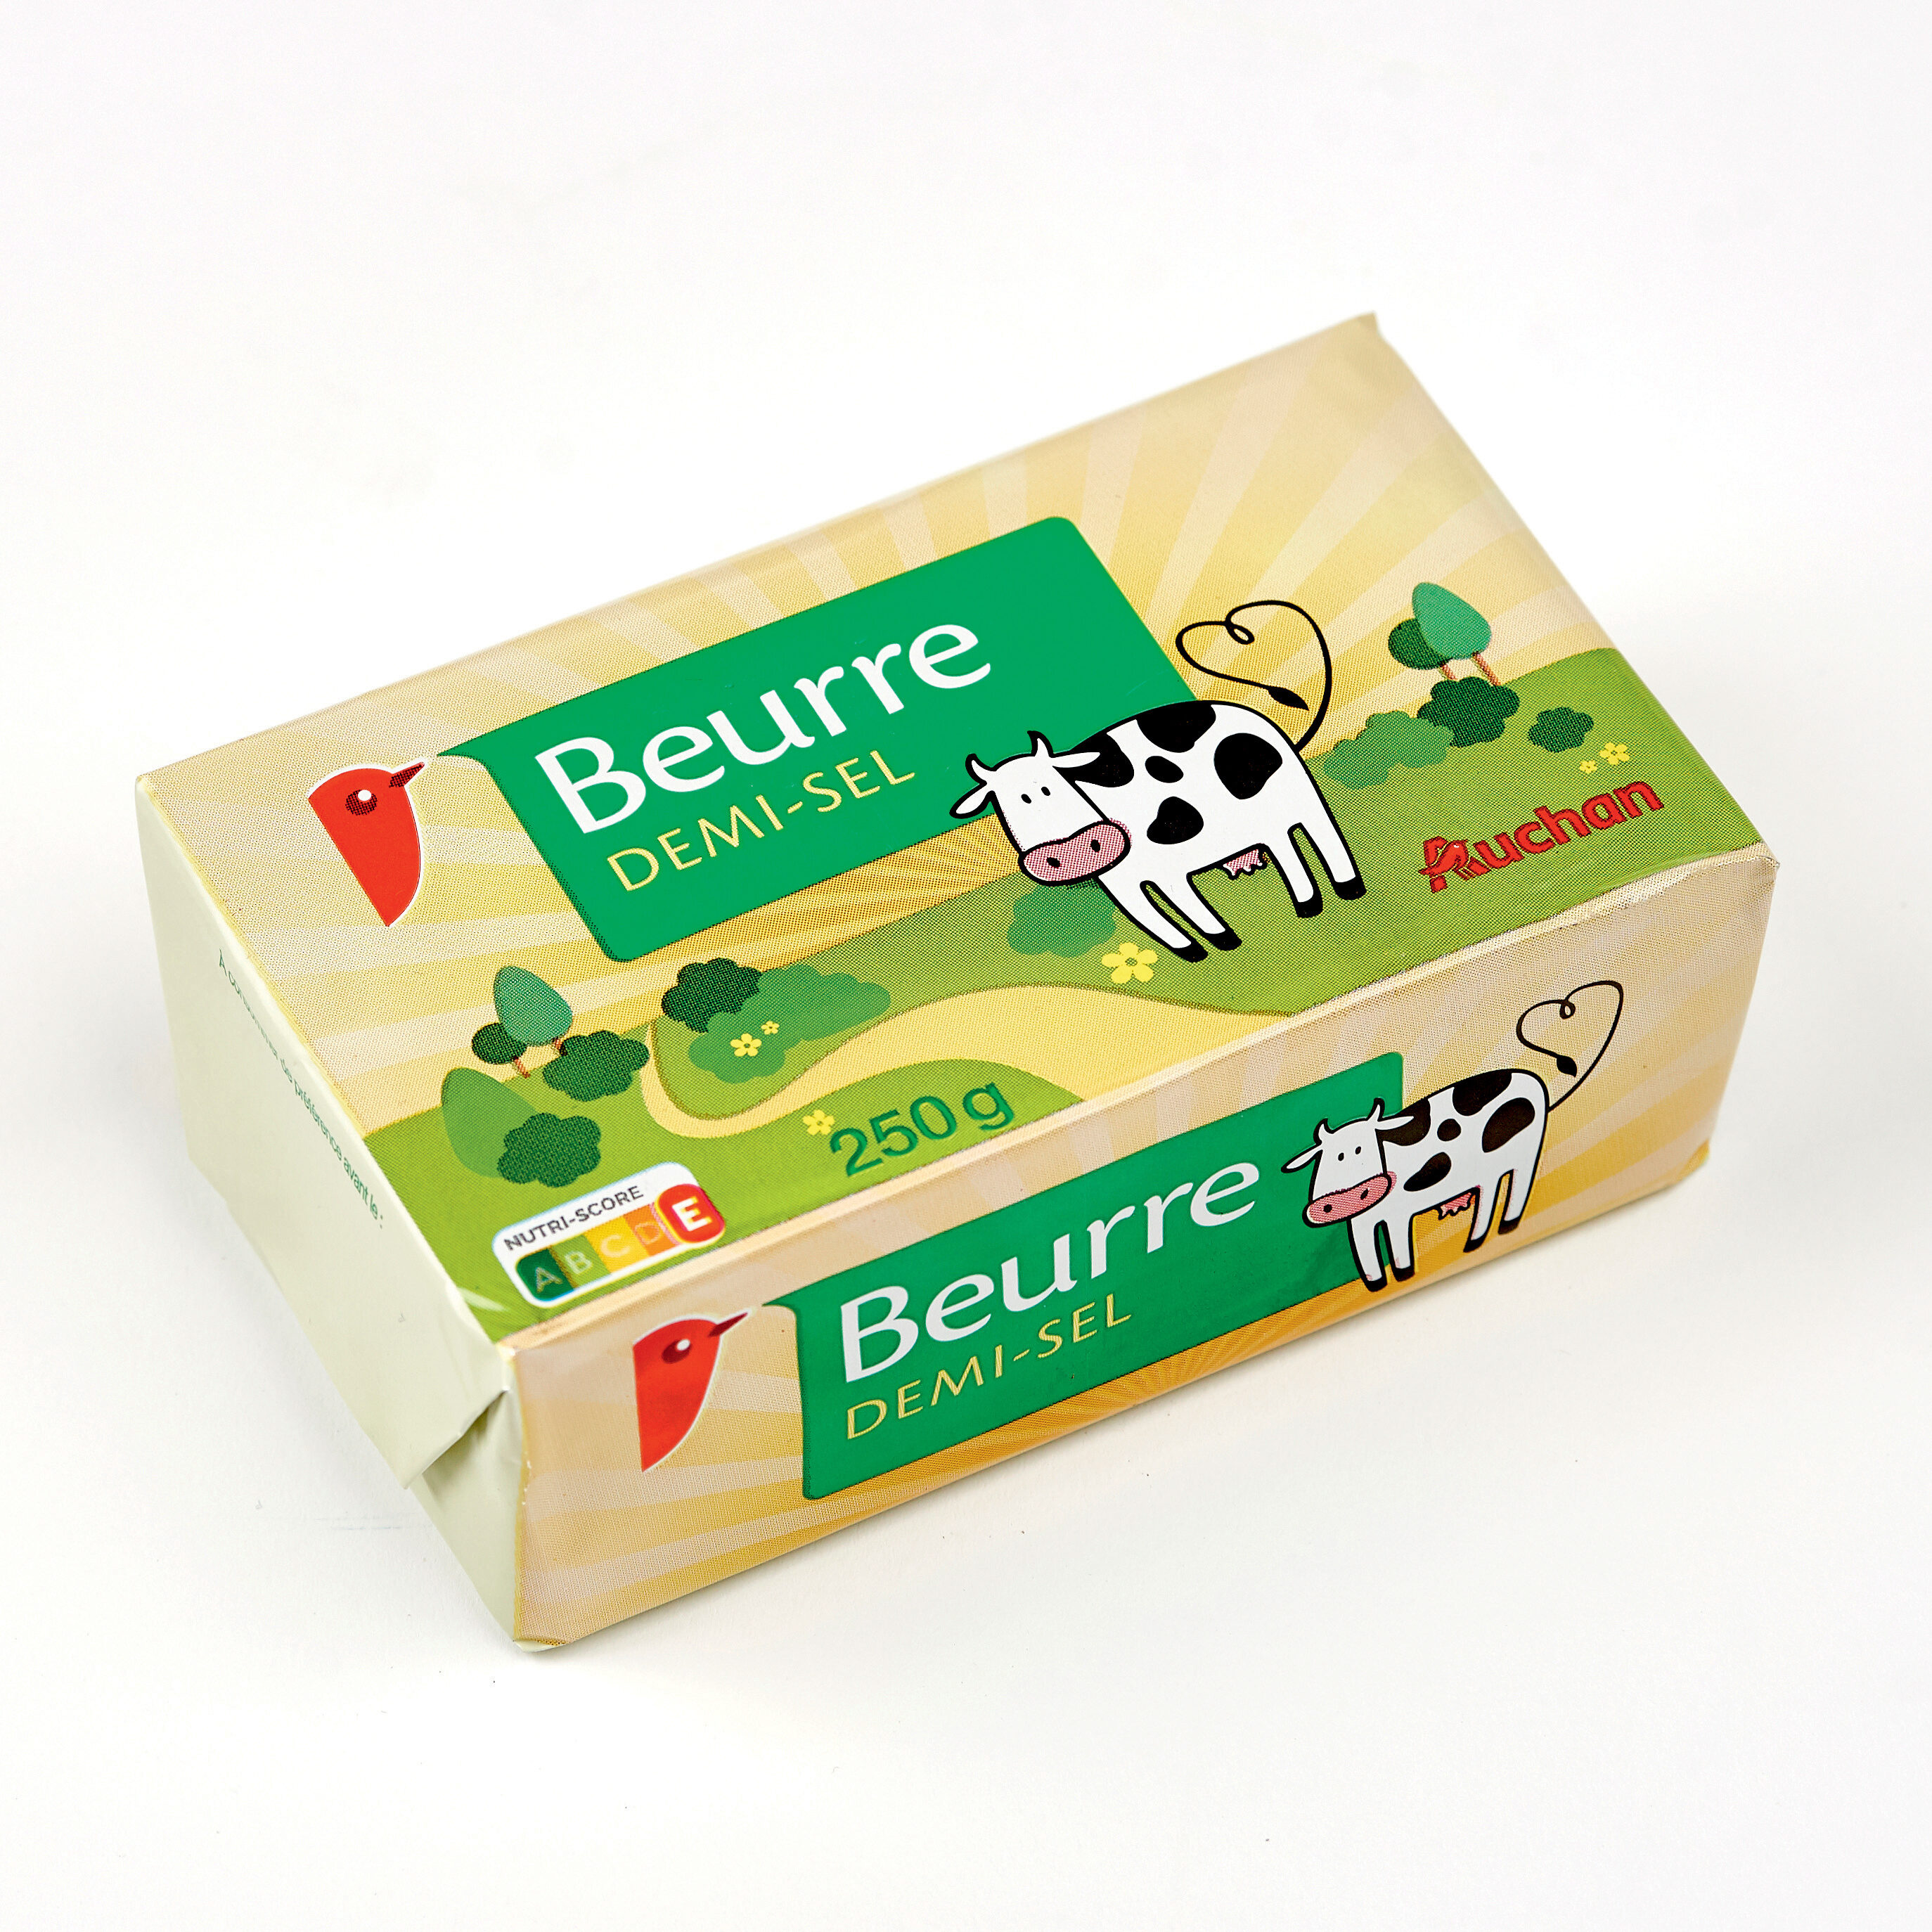 Beurre demi-sel - Product